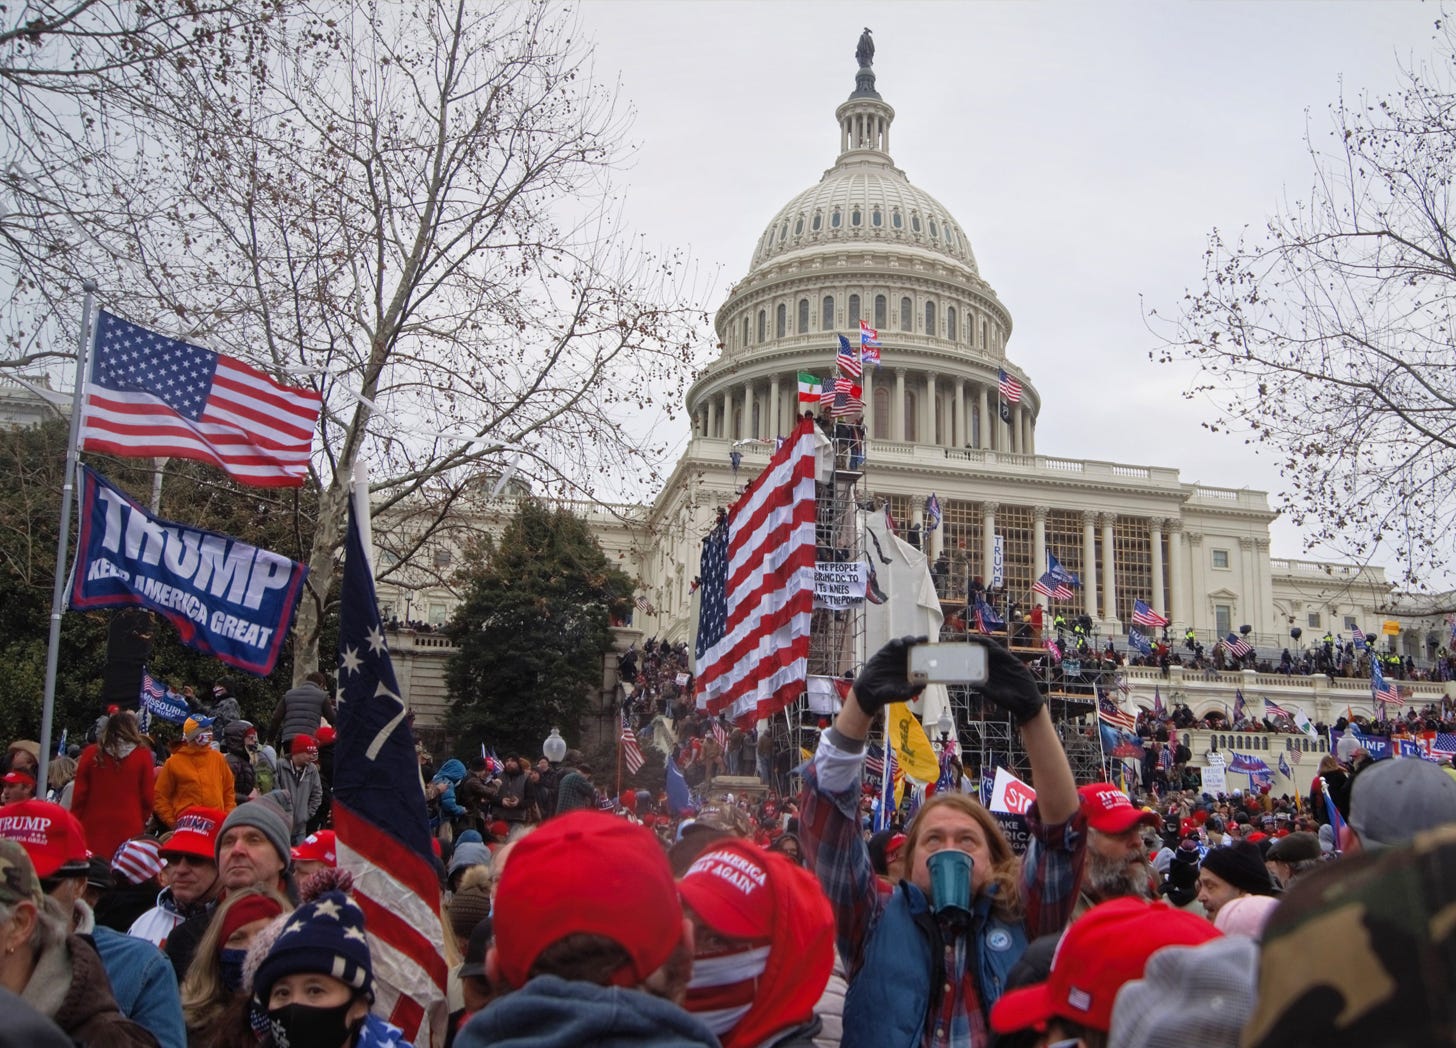 A photo of the January 6, 2021, insurrection at the U.S. Capitol features the Capitol building in the background and a crowd of protesters with American flags and Trump flags in the foreground.